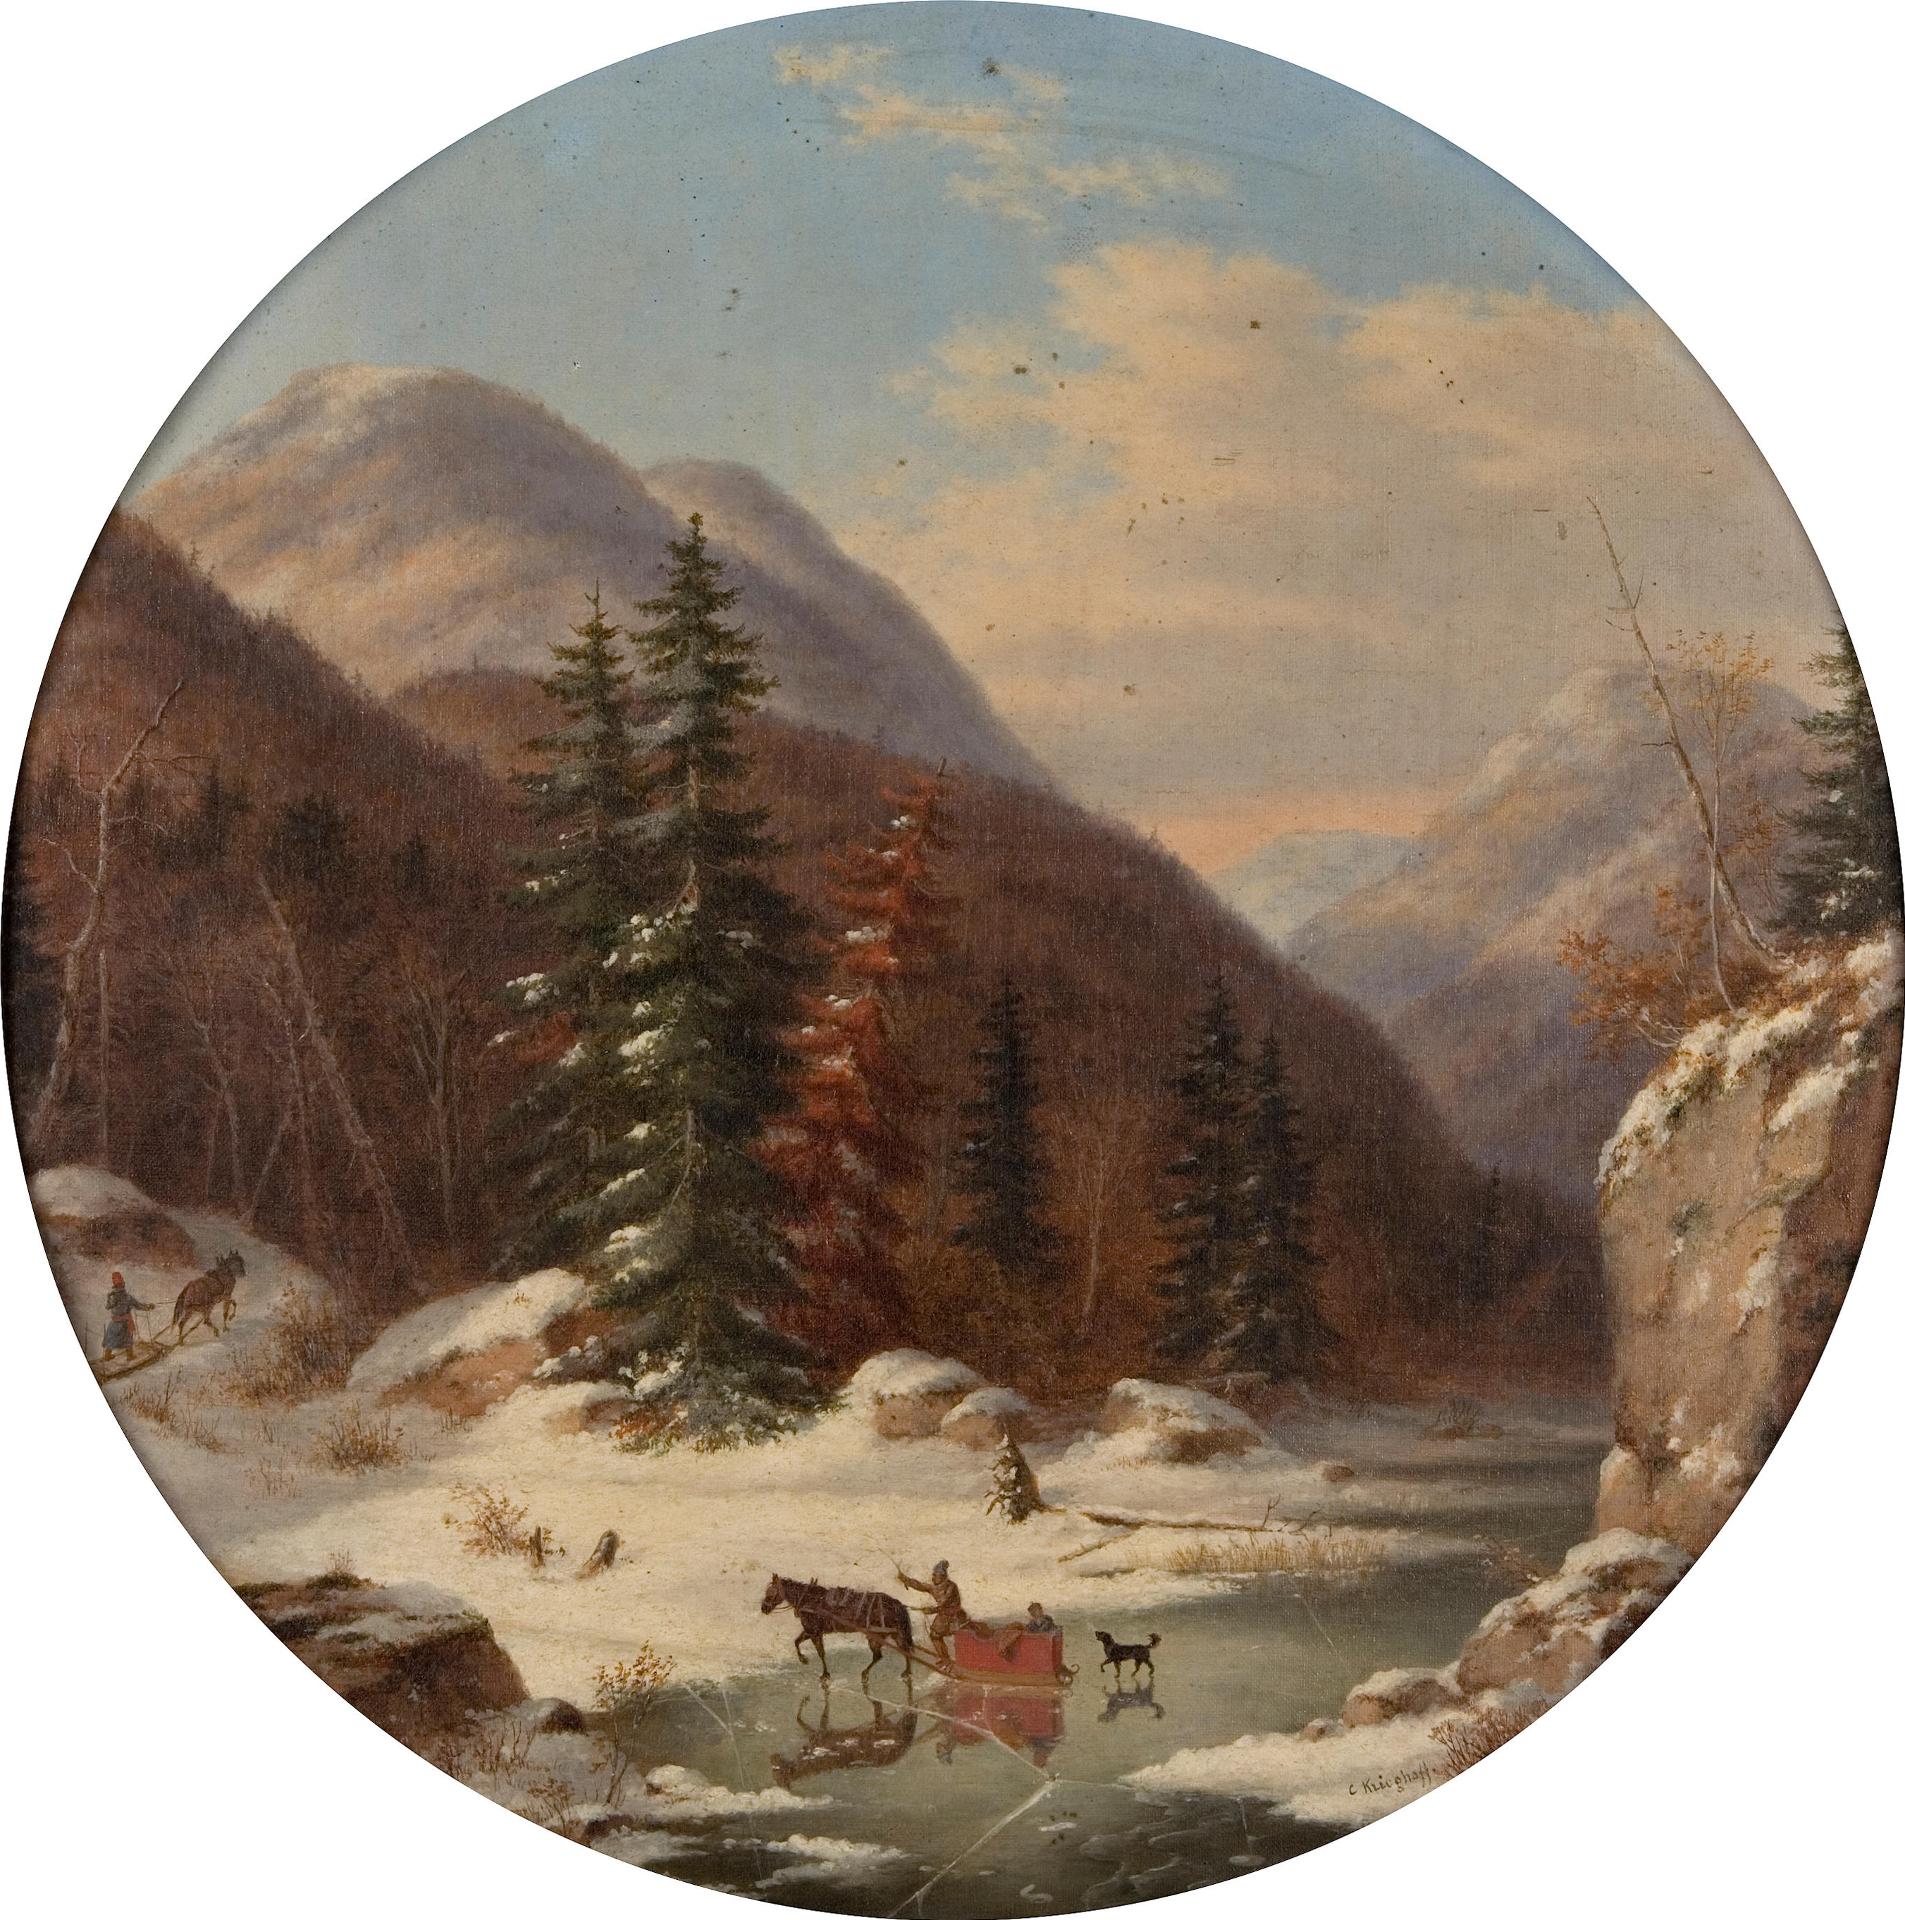 Cornelius David Krieghoff (1815-1872) - In the Mountains below Quebec, North Shore, French Canadians in Early Winter